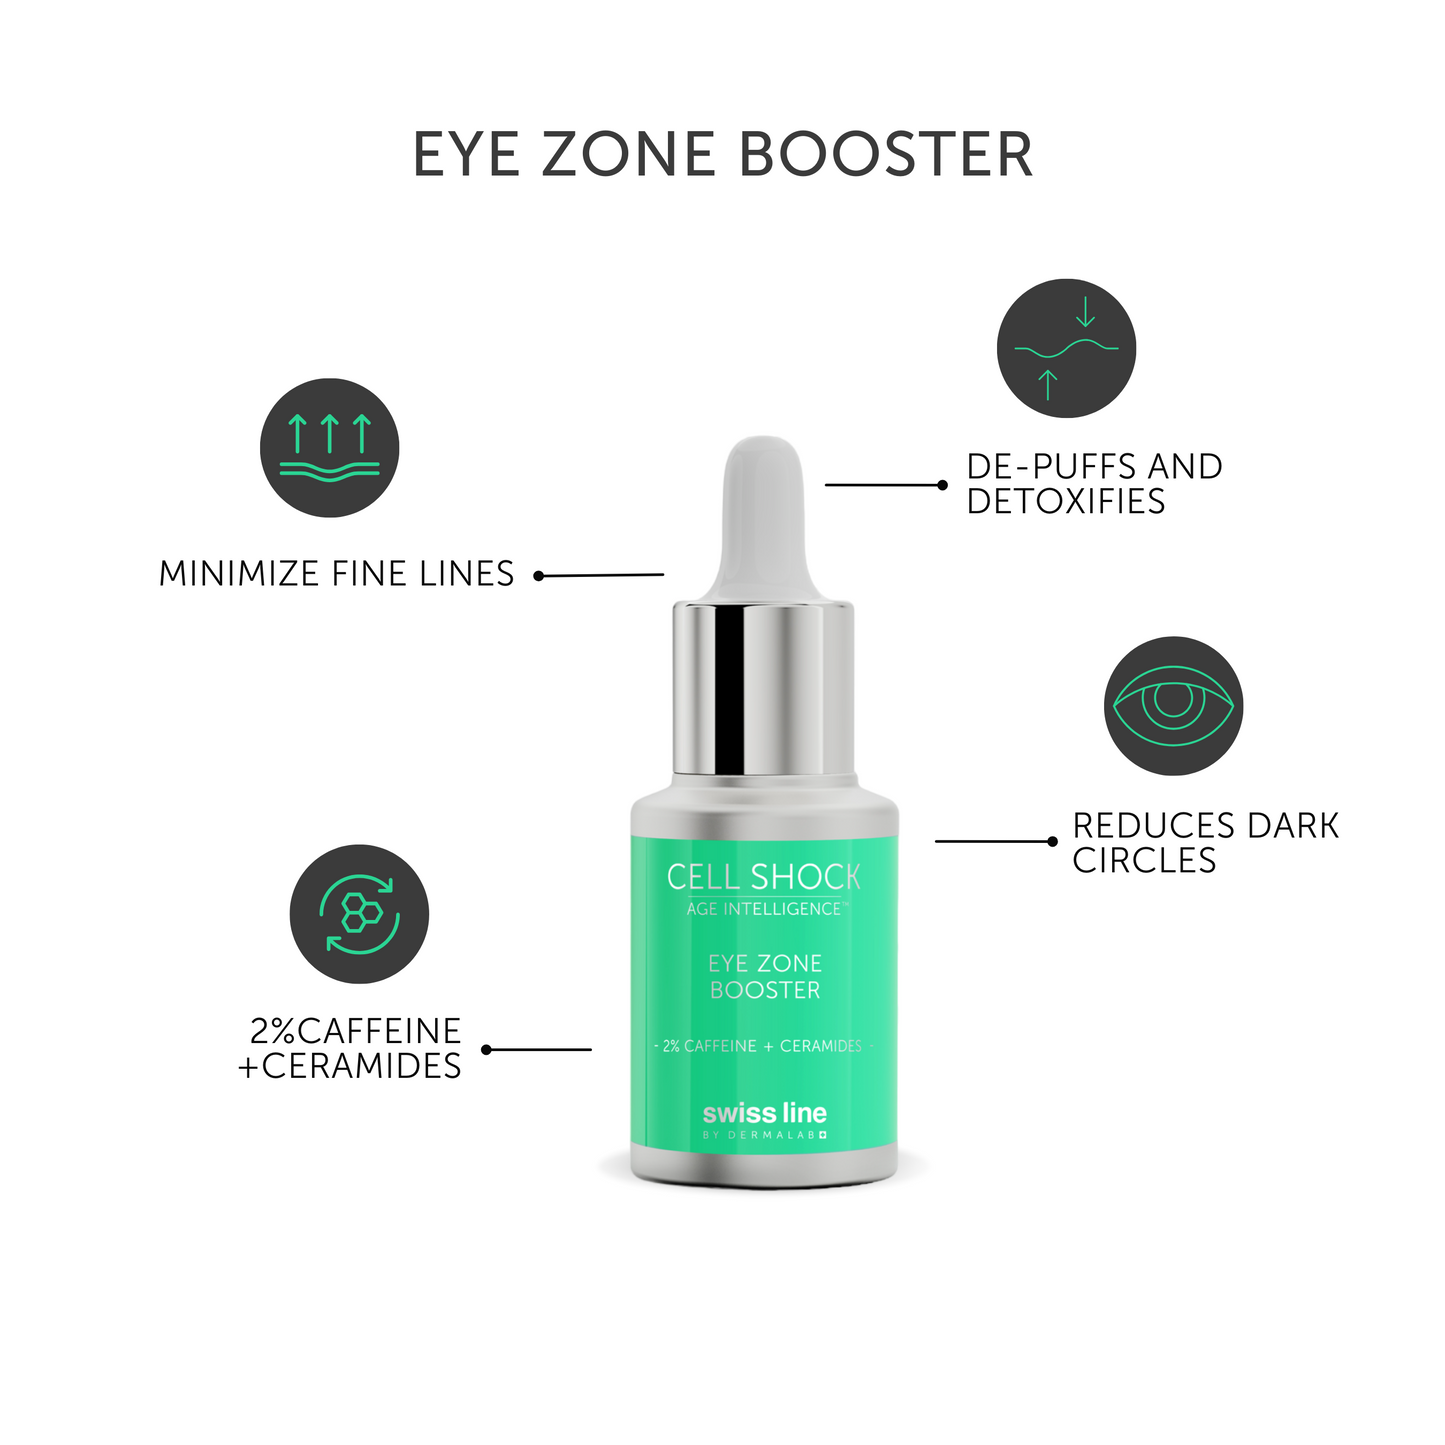 Cell Shock Age Intelligence Eye Zone Booster (15ml)